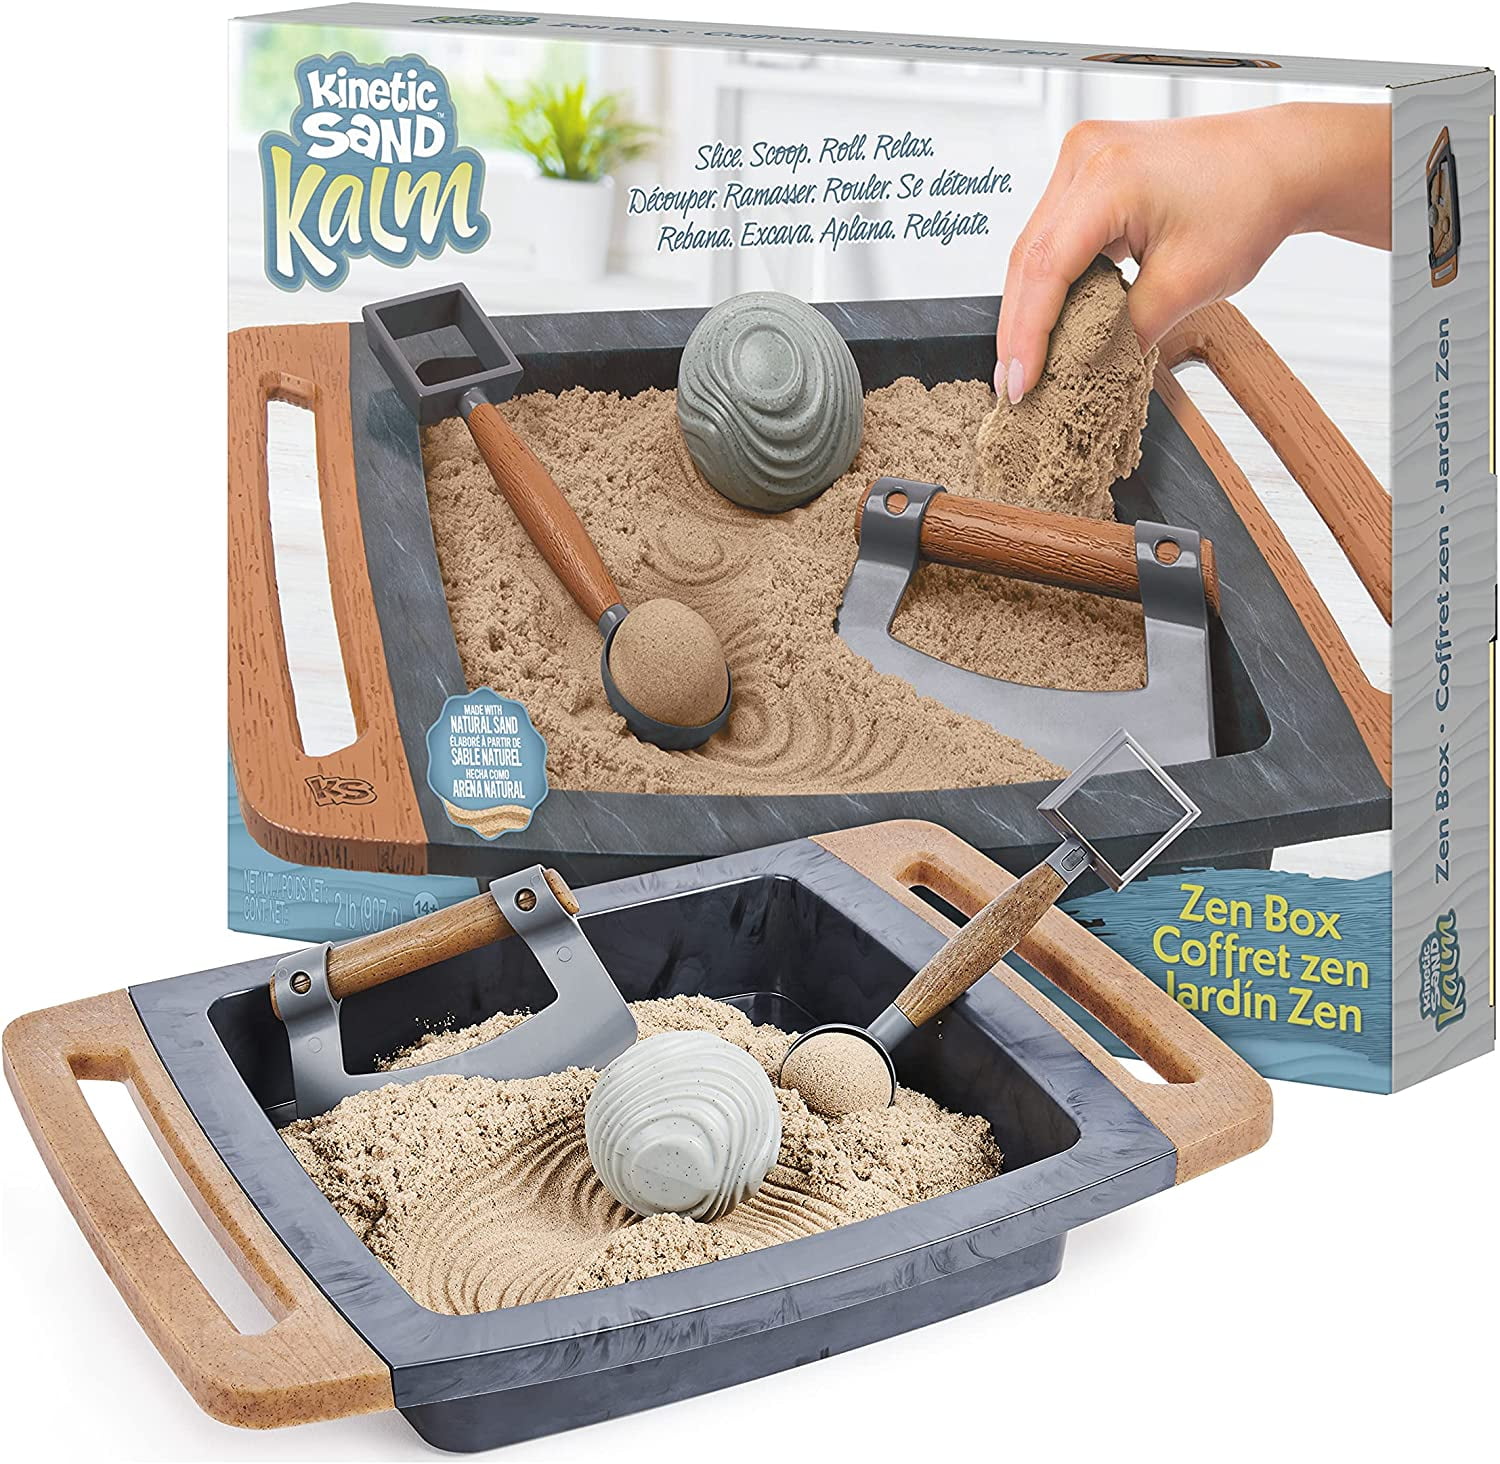 Plastic Spacer placed in this kinetic sand toy : r/assholedesign